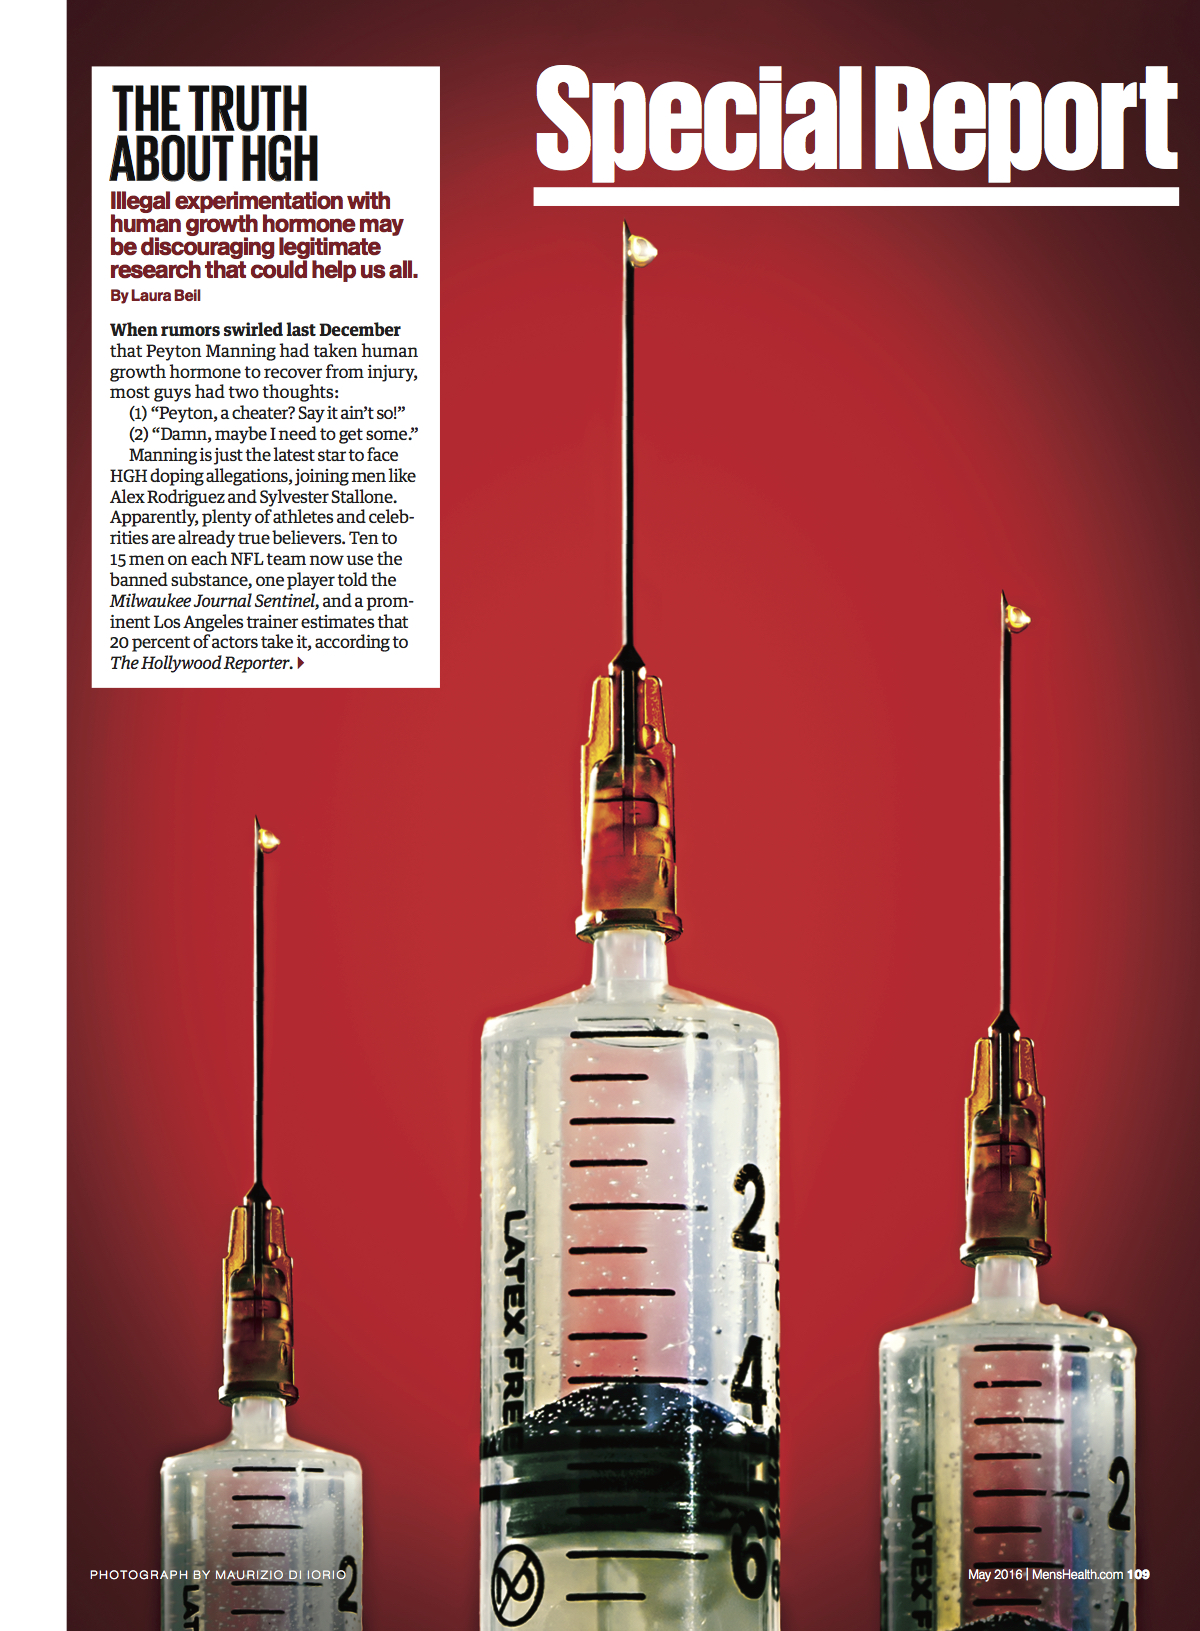   The Truth about HGH  for  Men's Health (May 2016 Issue)  